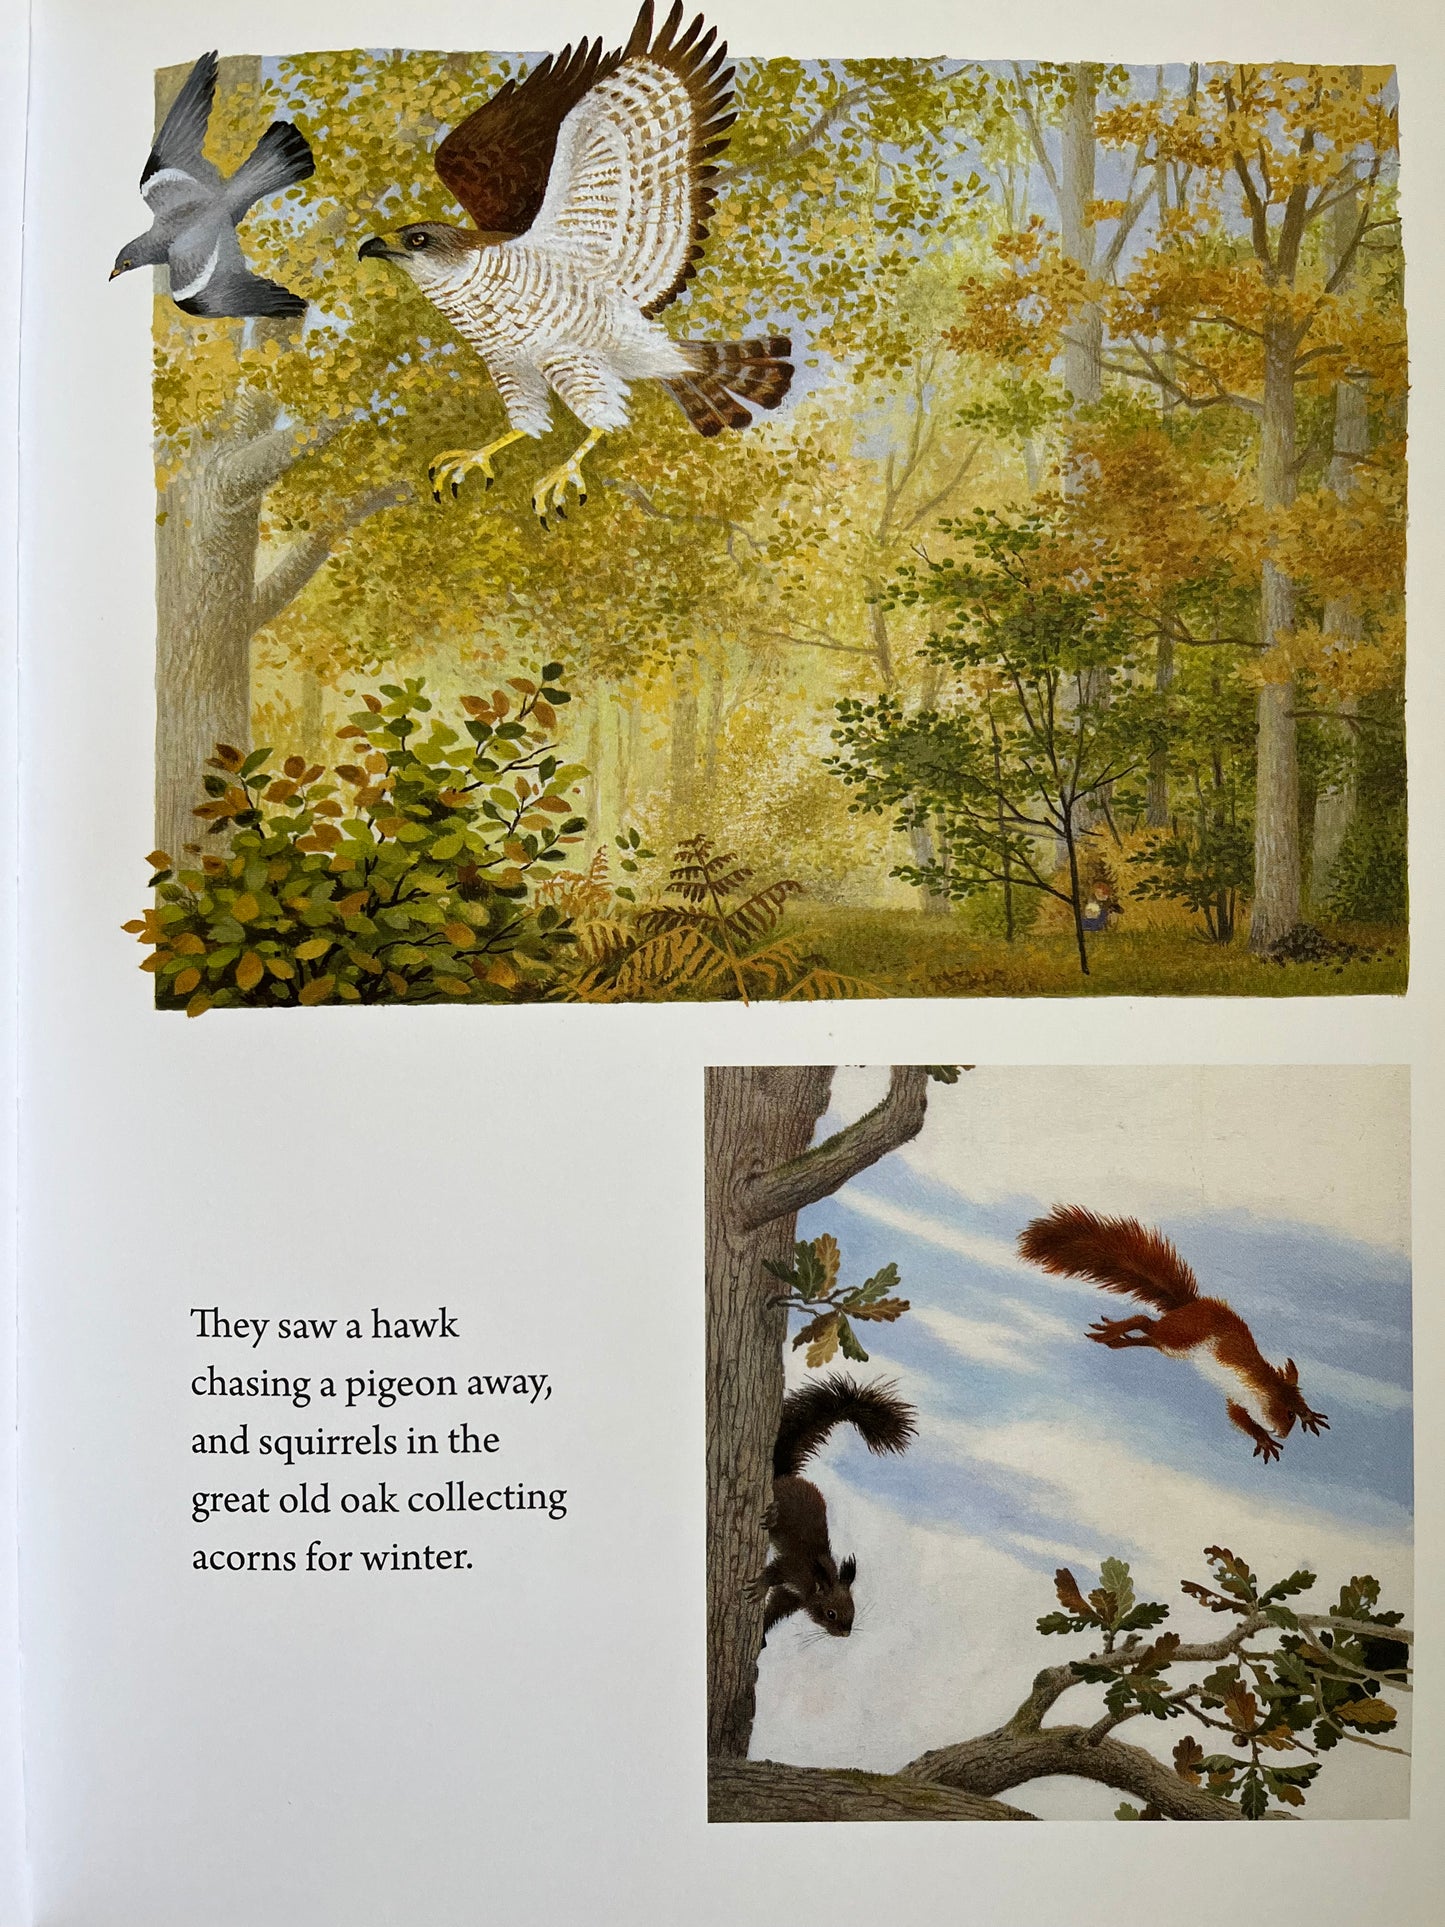 Educational Children's Picture Book - A YEAR AROUND THE GREAT OAK